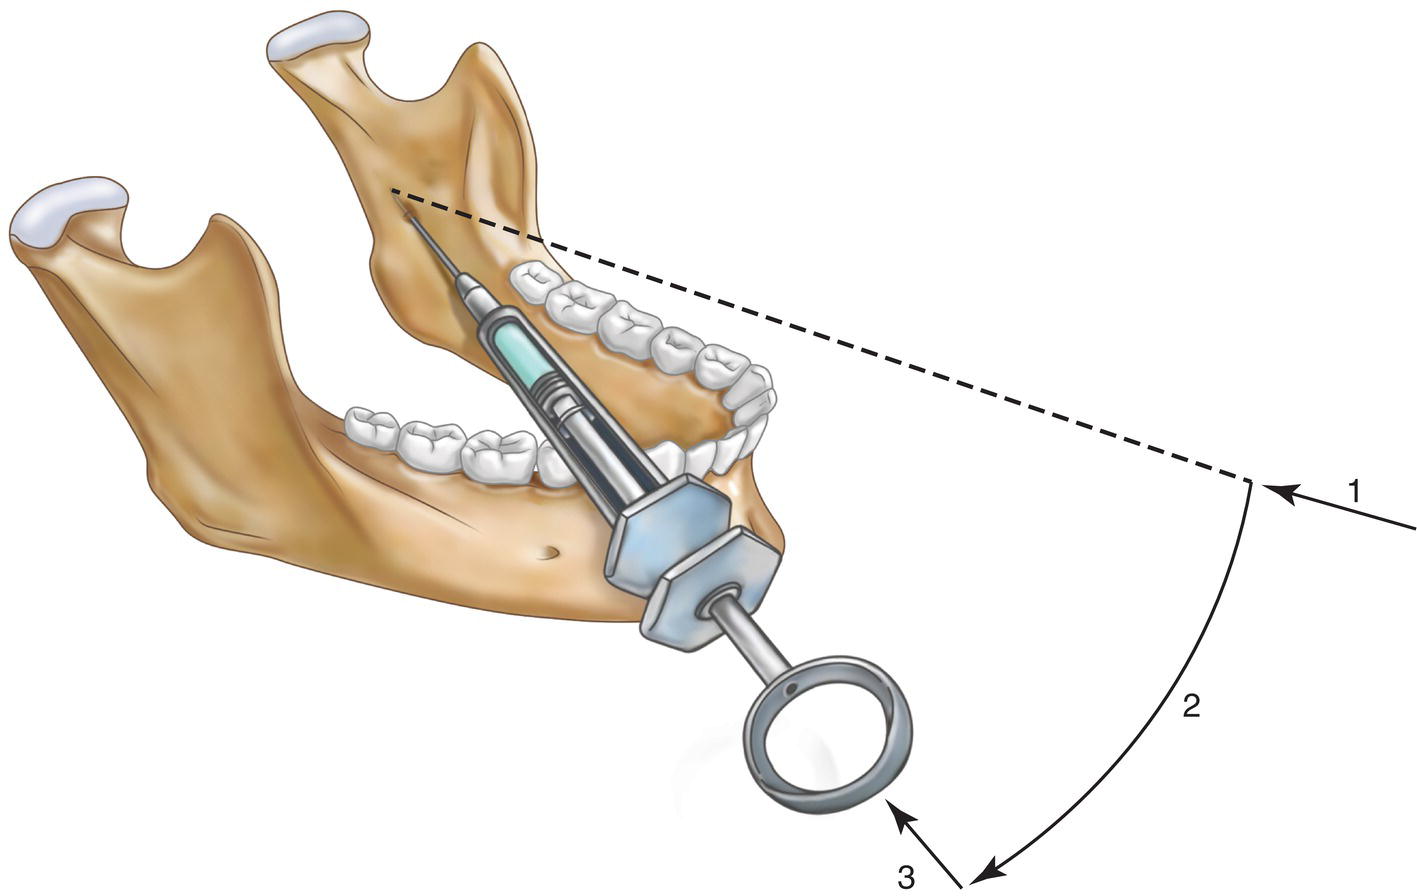 An illustration of insertion of needle in the buccal mucosa with mandibular block. The points are marked 1, 2, and 3 from right to left.